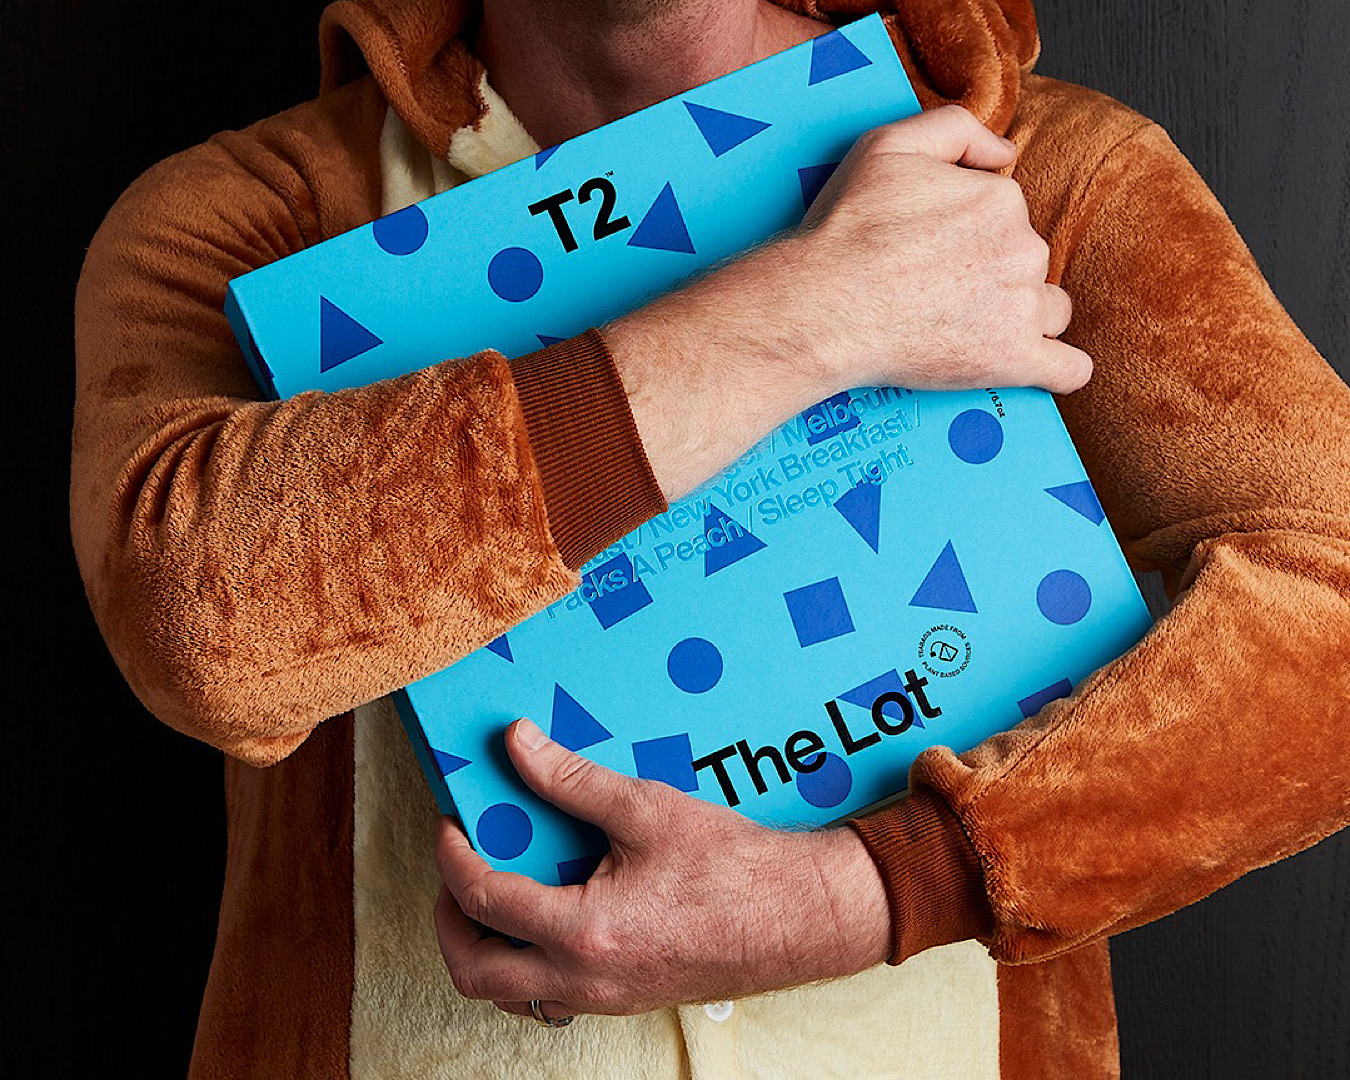 A dad in a comfy-looking brown jumper hugs a bright blue box of T2 The Lot with glee after being gifted it on Father’s Day. 